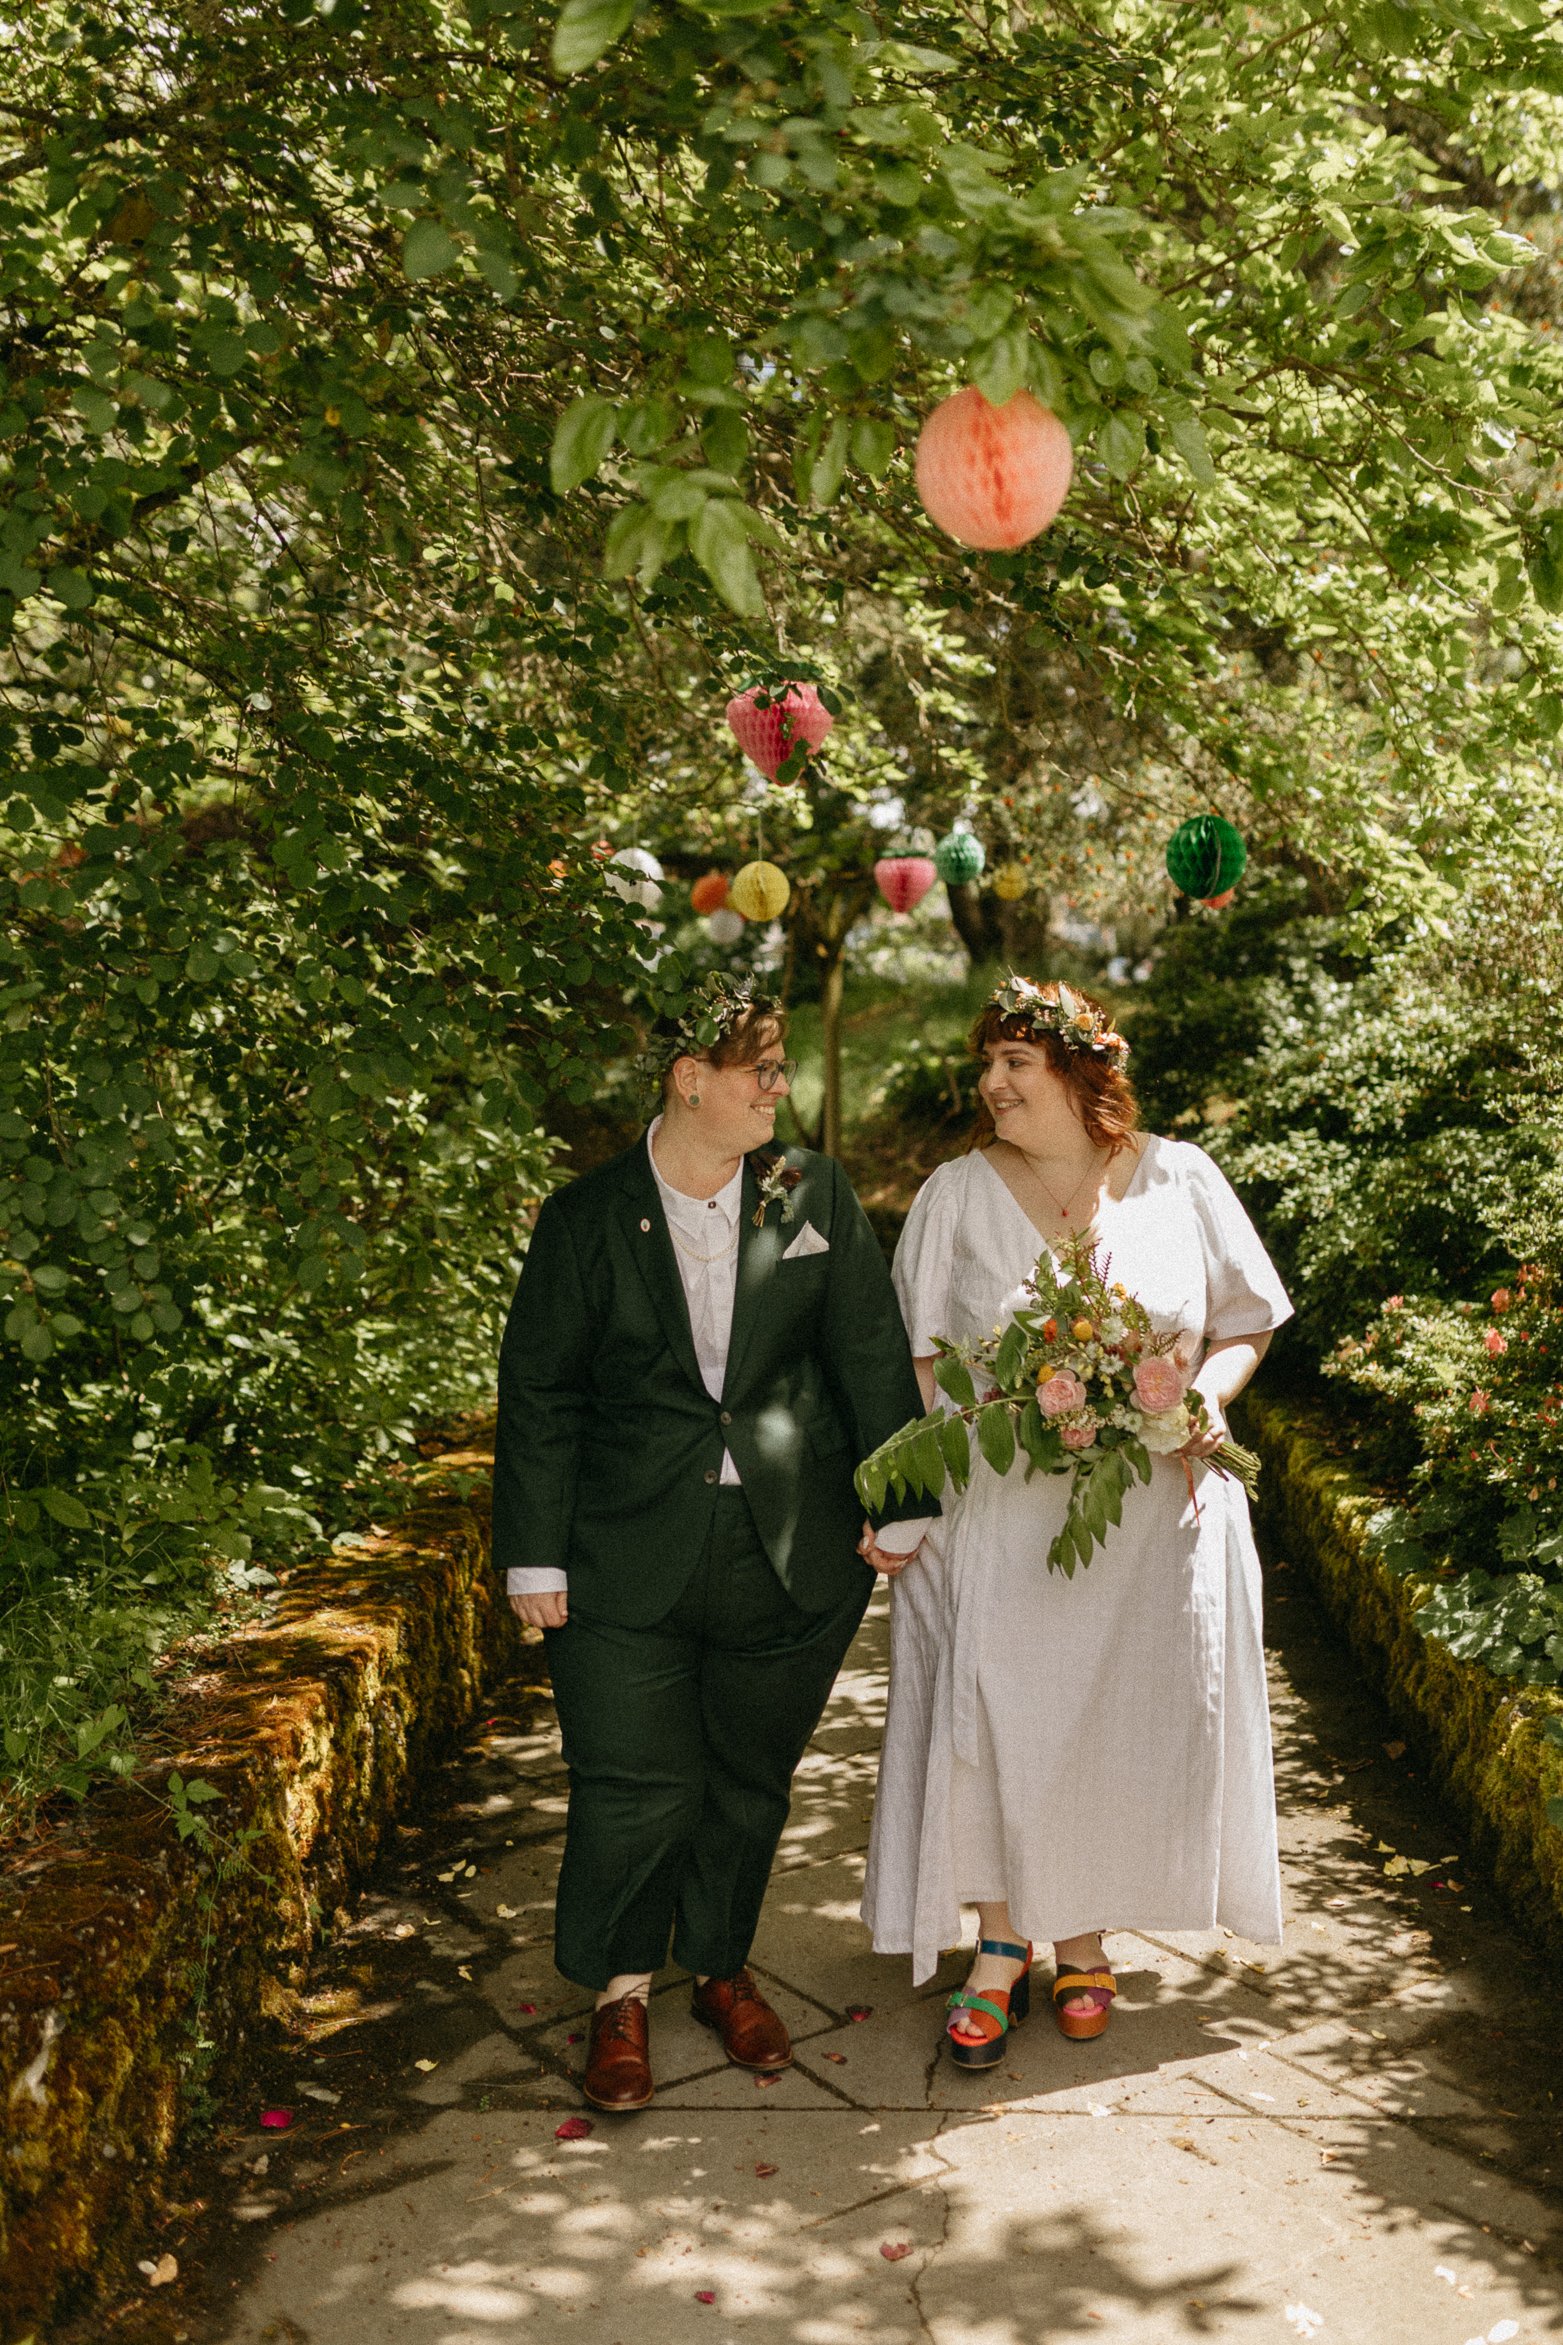 sunsoaked-queer-seattle-washington-arboretum-rose-garden-lqbtq-wedding-by-genderqueer-tacoma-elopement-photographer-halle-roland-photography-32.jpg